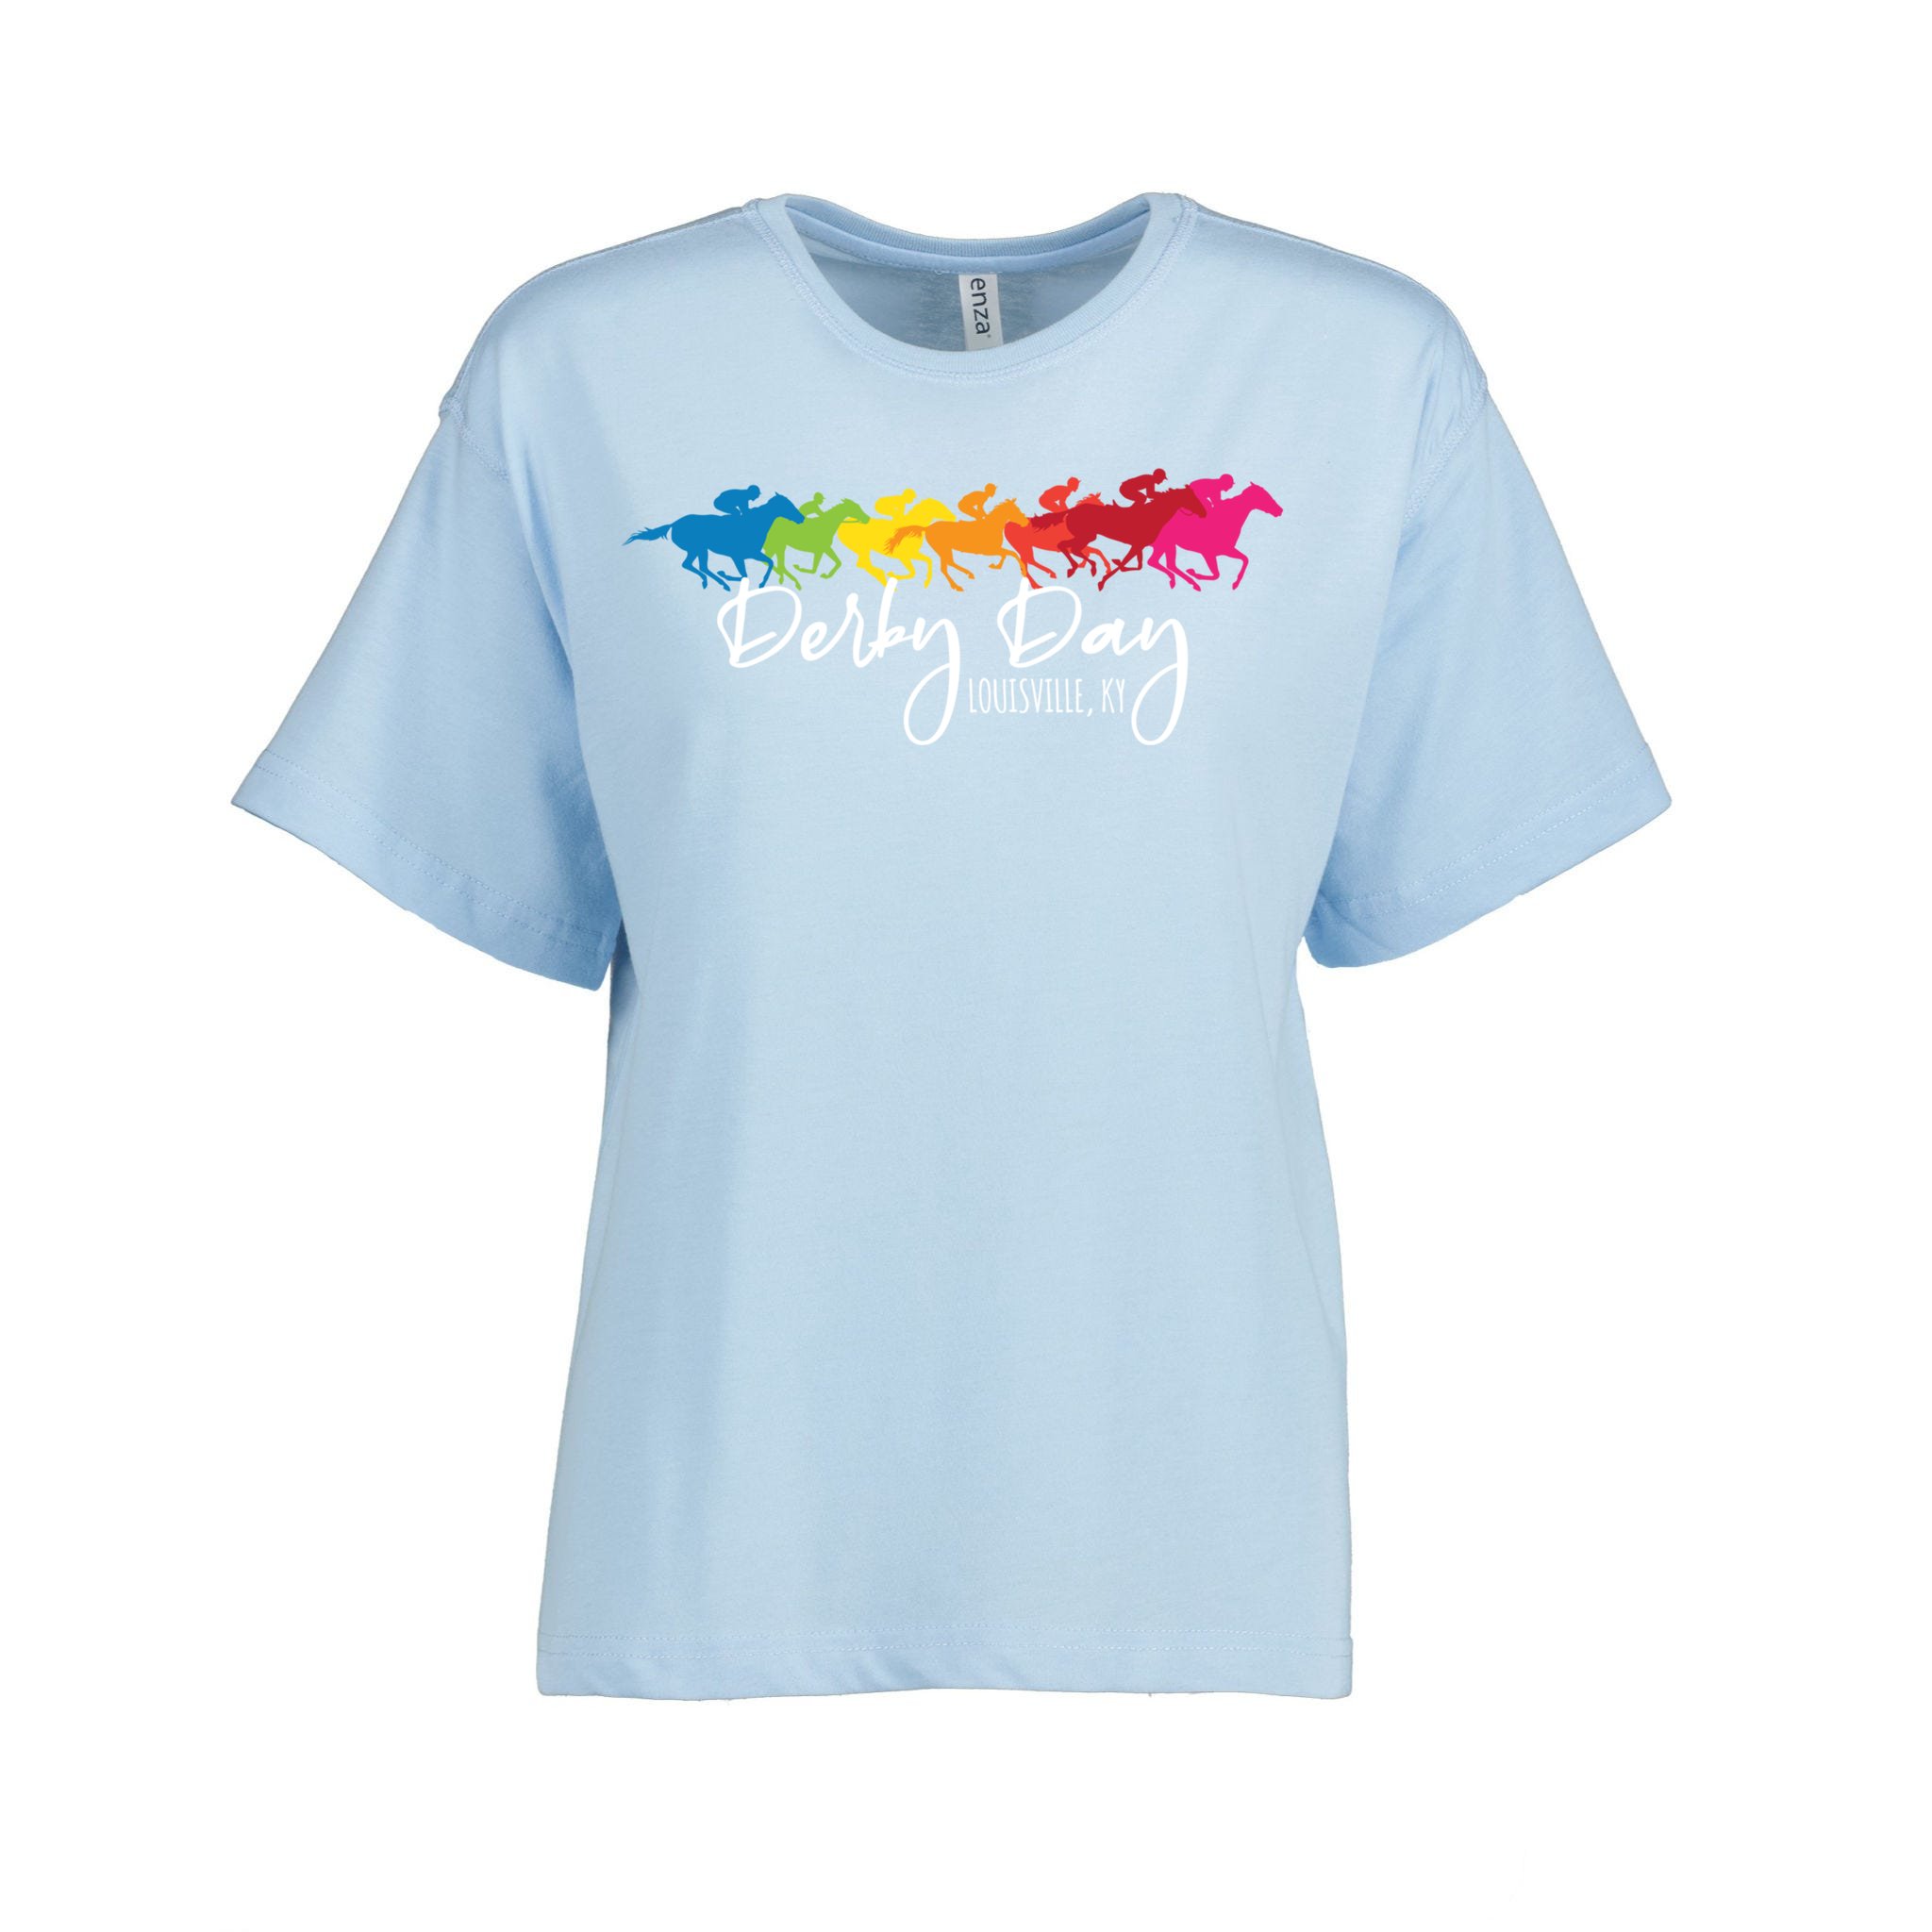 Funny Derby Day Louisville Kentucky Style Horse Racing Gift Kids T